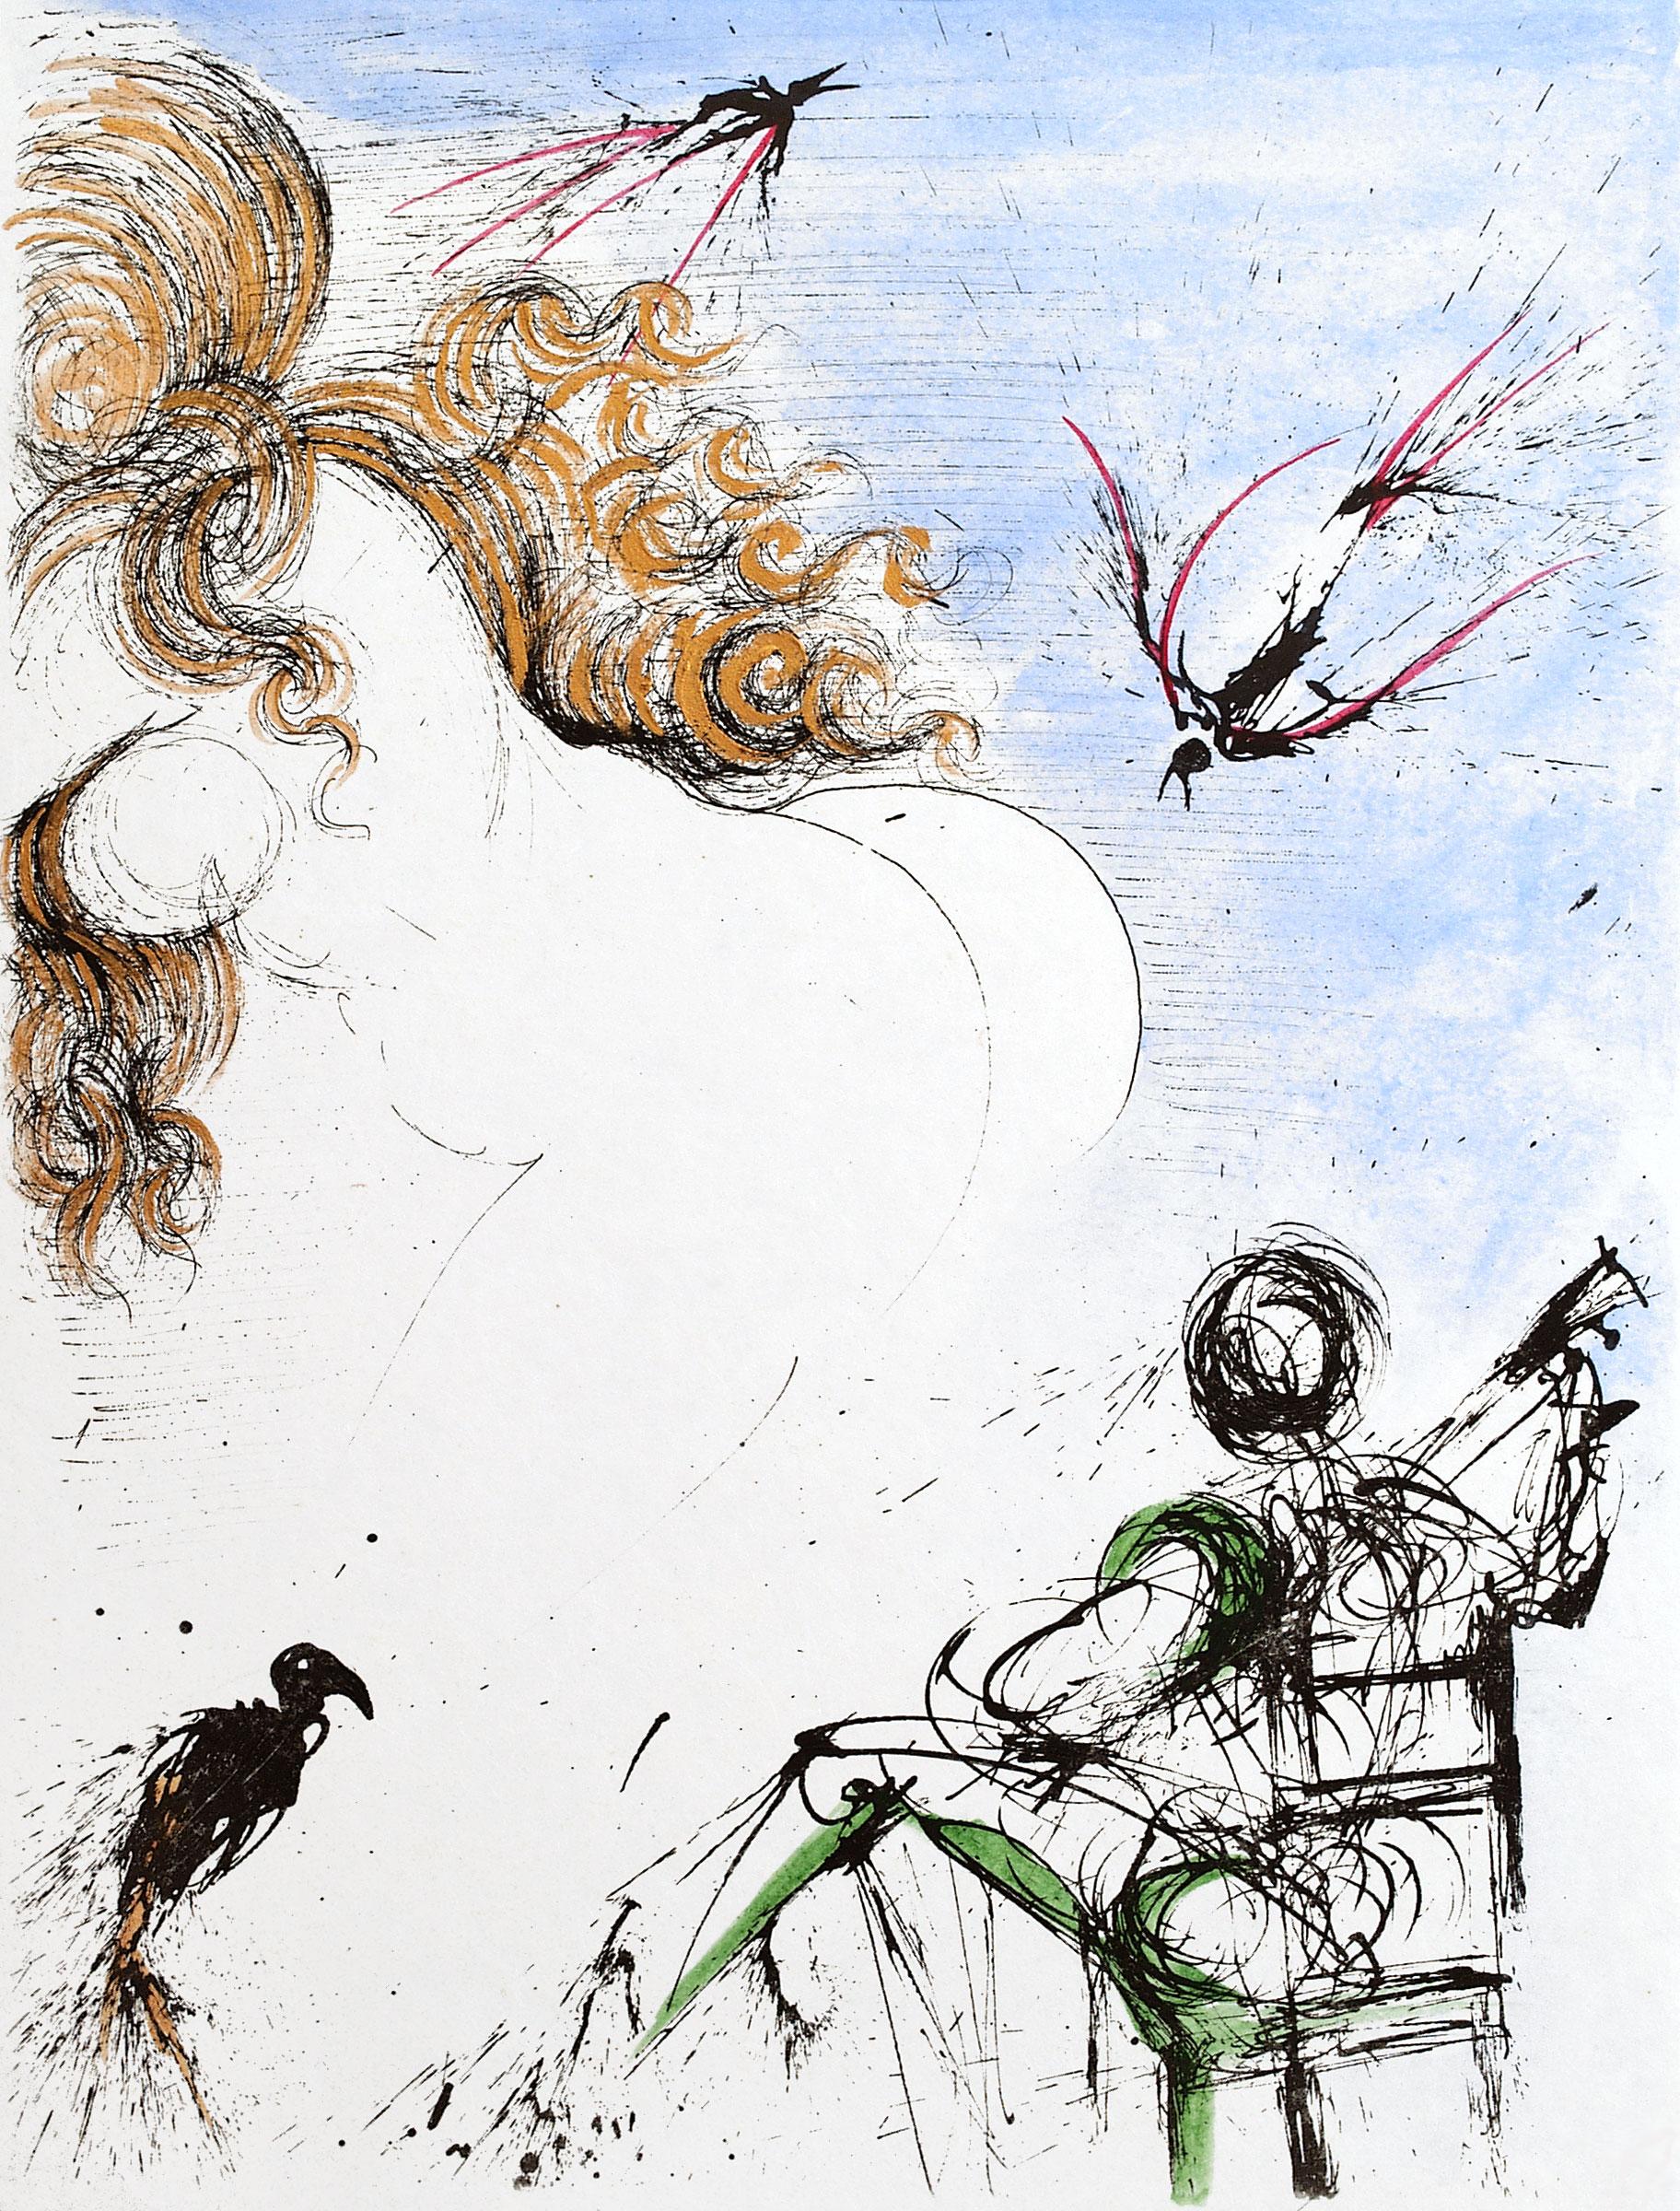 Apollinaire “Woman with Parrot” (91/145) - Print by Salvador Dalí